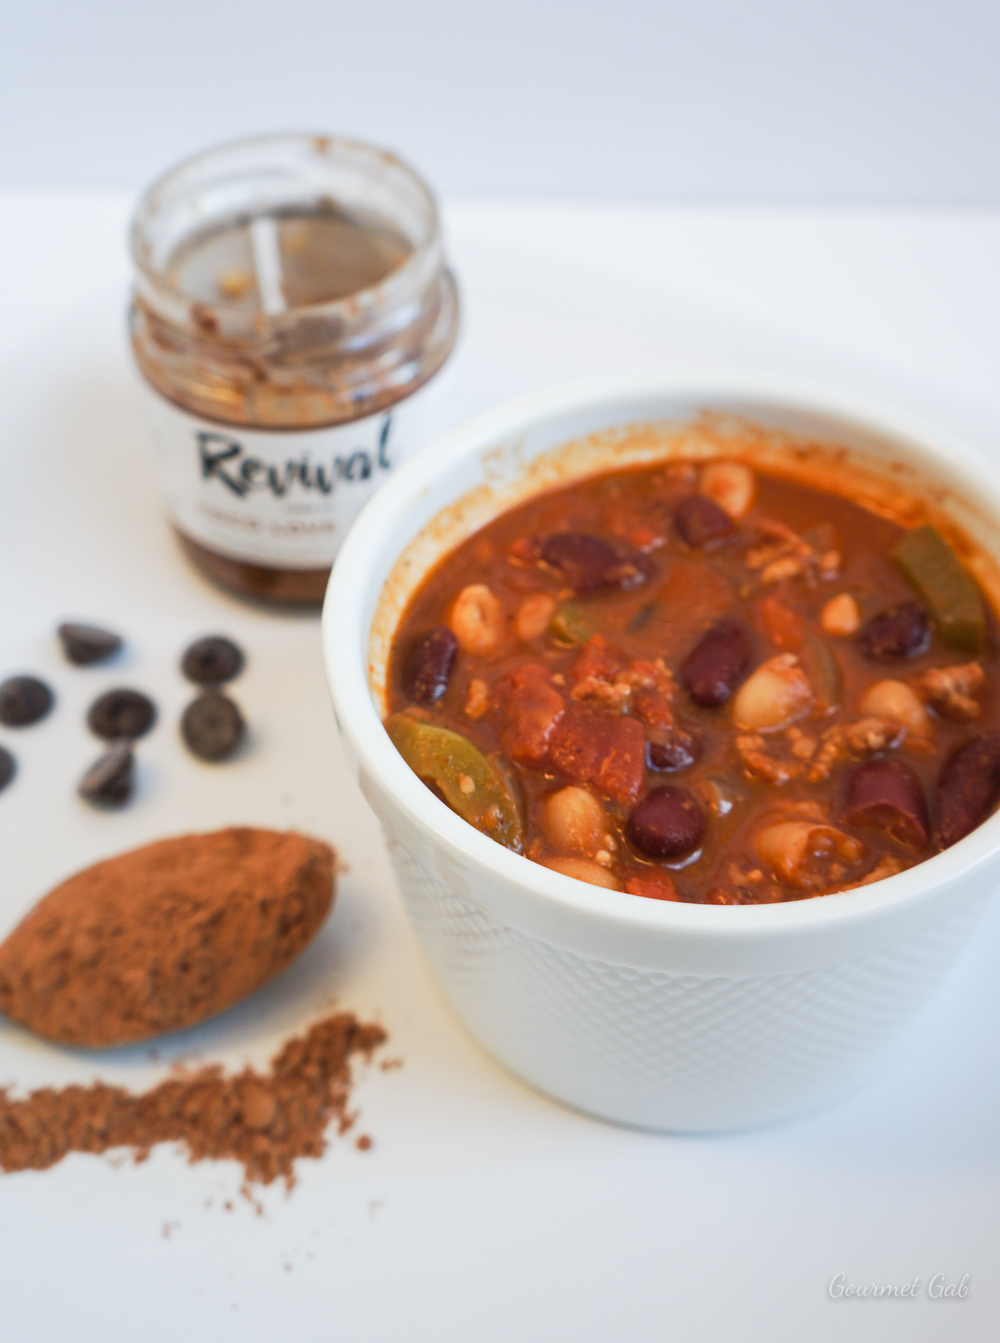 Gourmet Gab Coco Almond Butter Chili